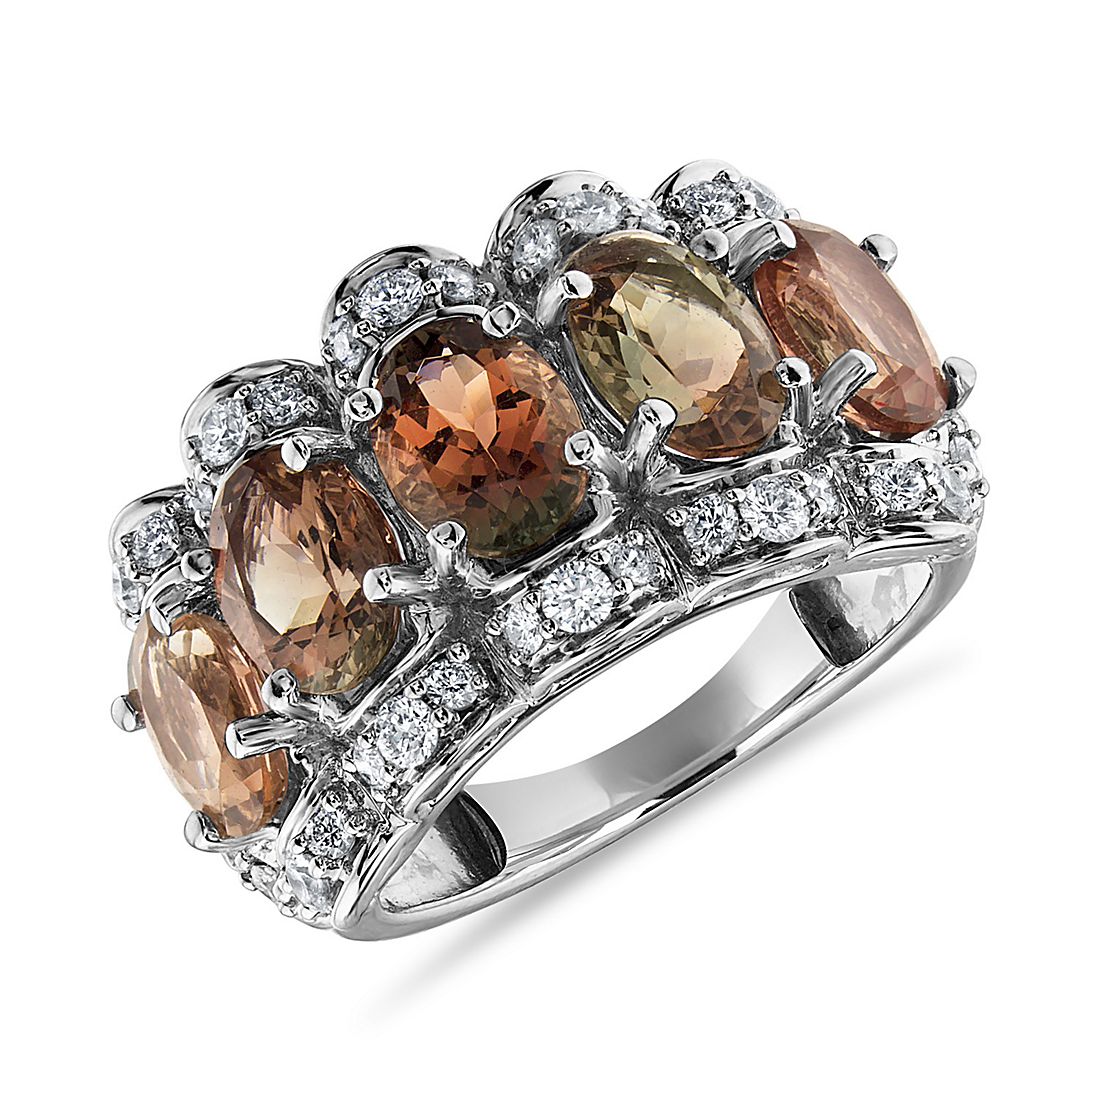 Oval Oregon Sunstone and Diamond Ring in 18k White Gold